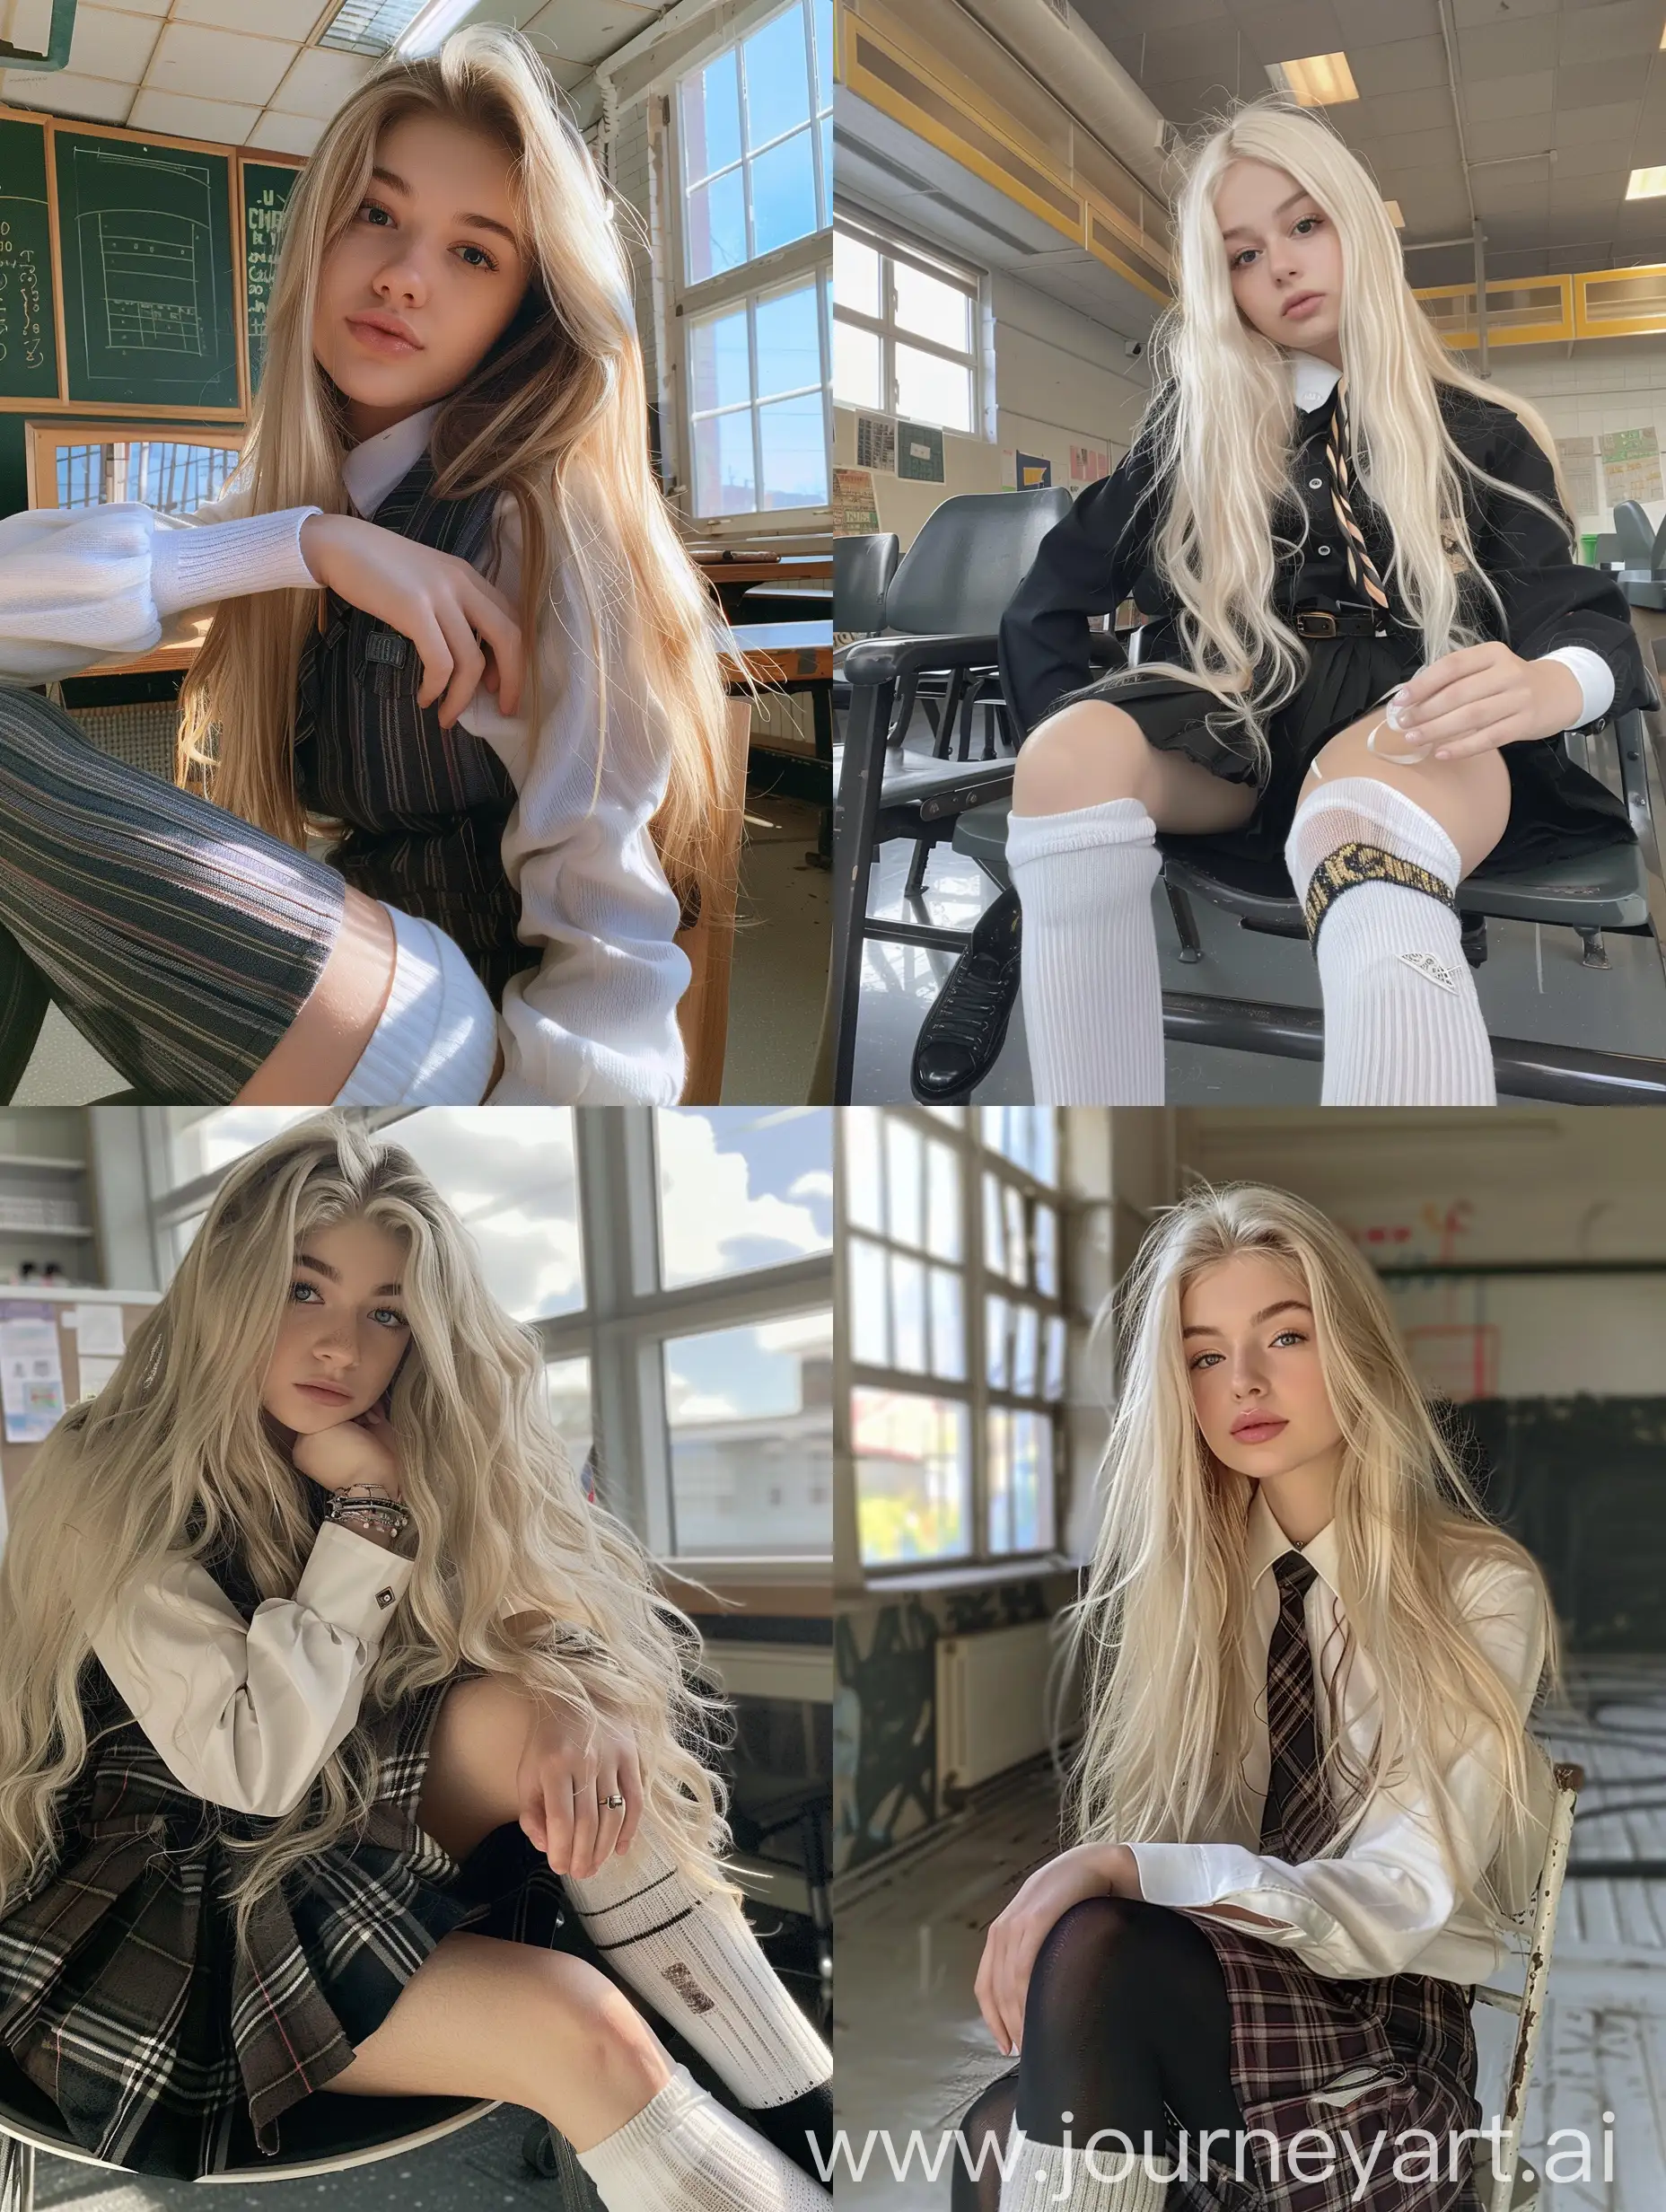 1 girl, long blond hair , 22 years old, influencer, beauty , in the school ,school uniform , makeup, sitting on chair , socks and boots, no effect, selfie , smiling, iphone selfie, no filters , iphone photo natural